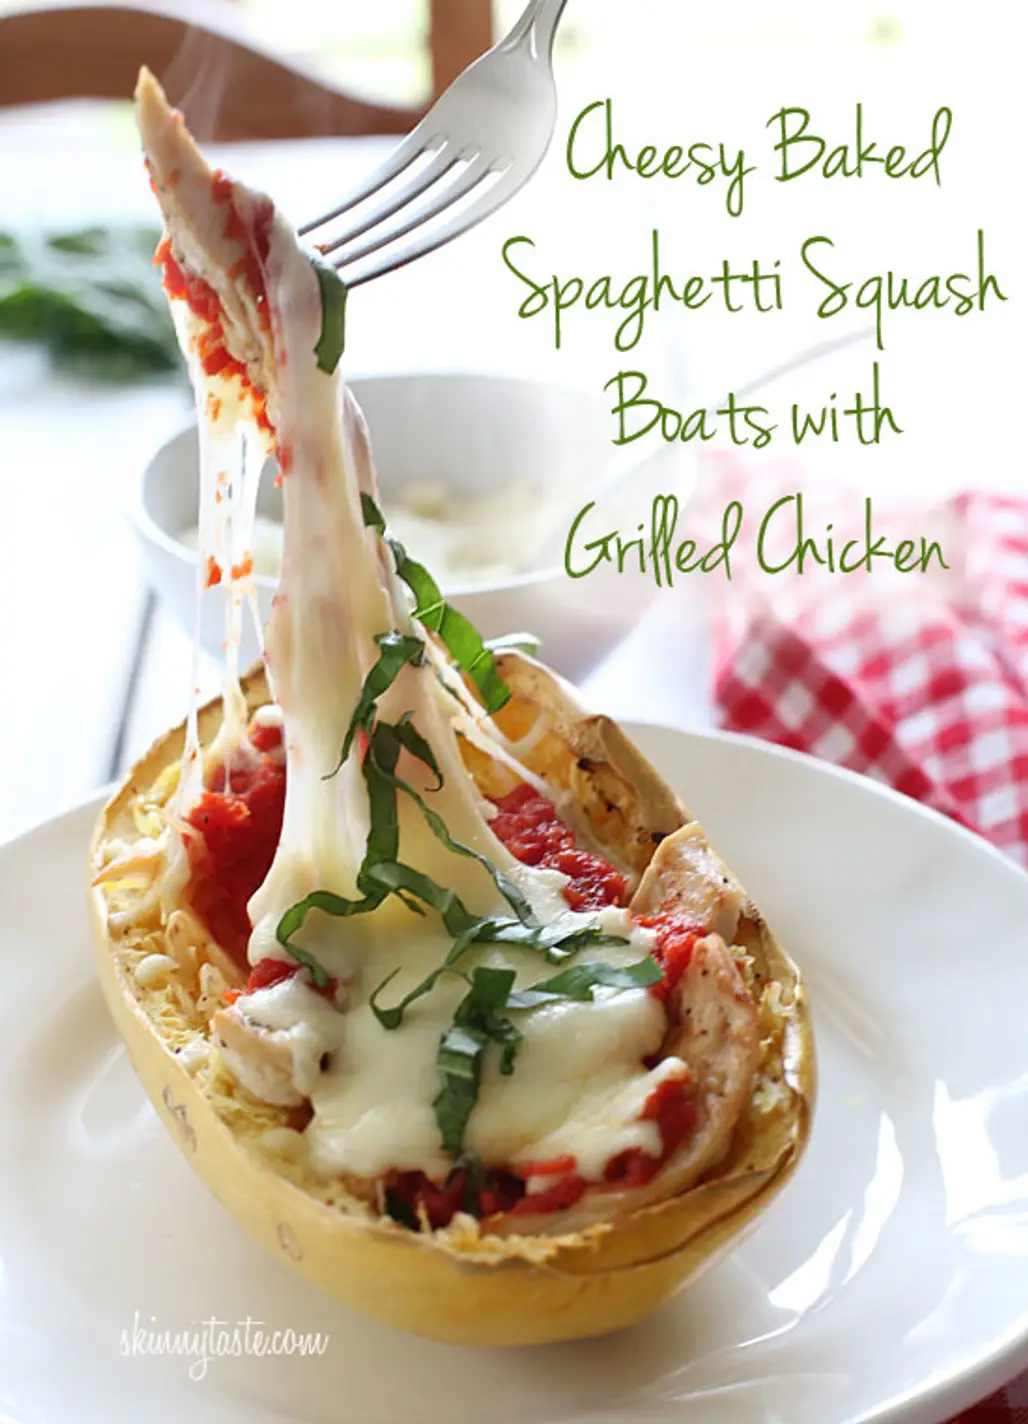 Cheesy Baked Spaghetti Squash Boats with Chicken